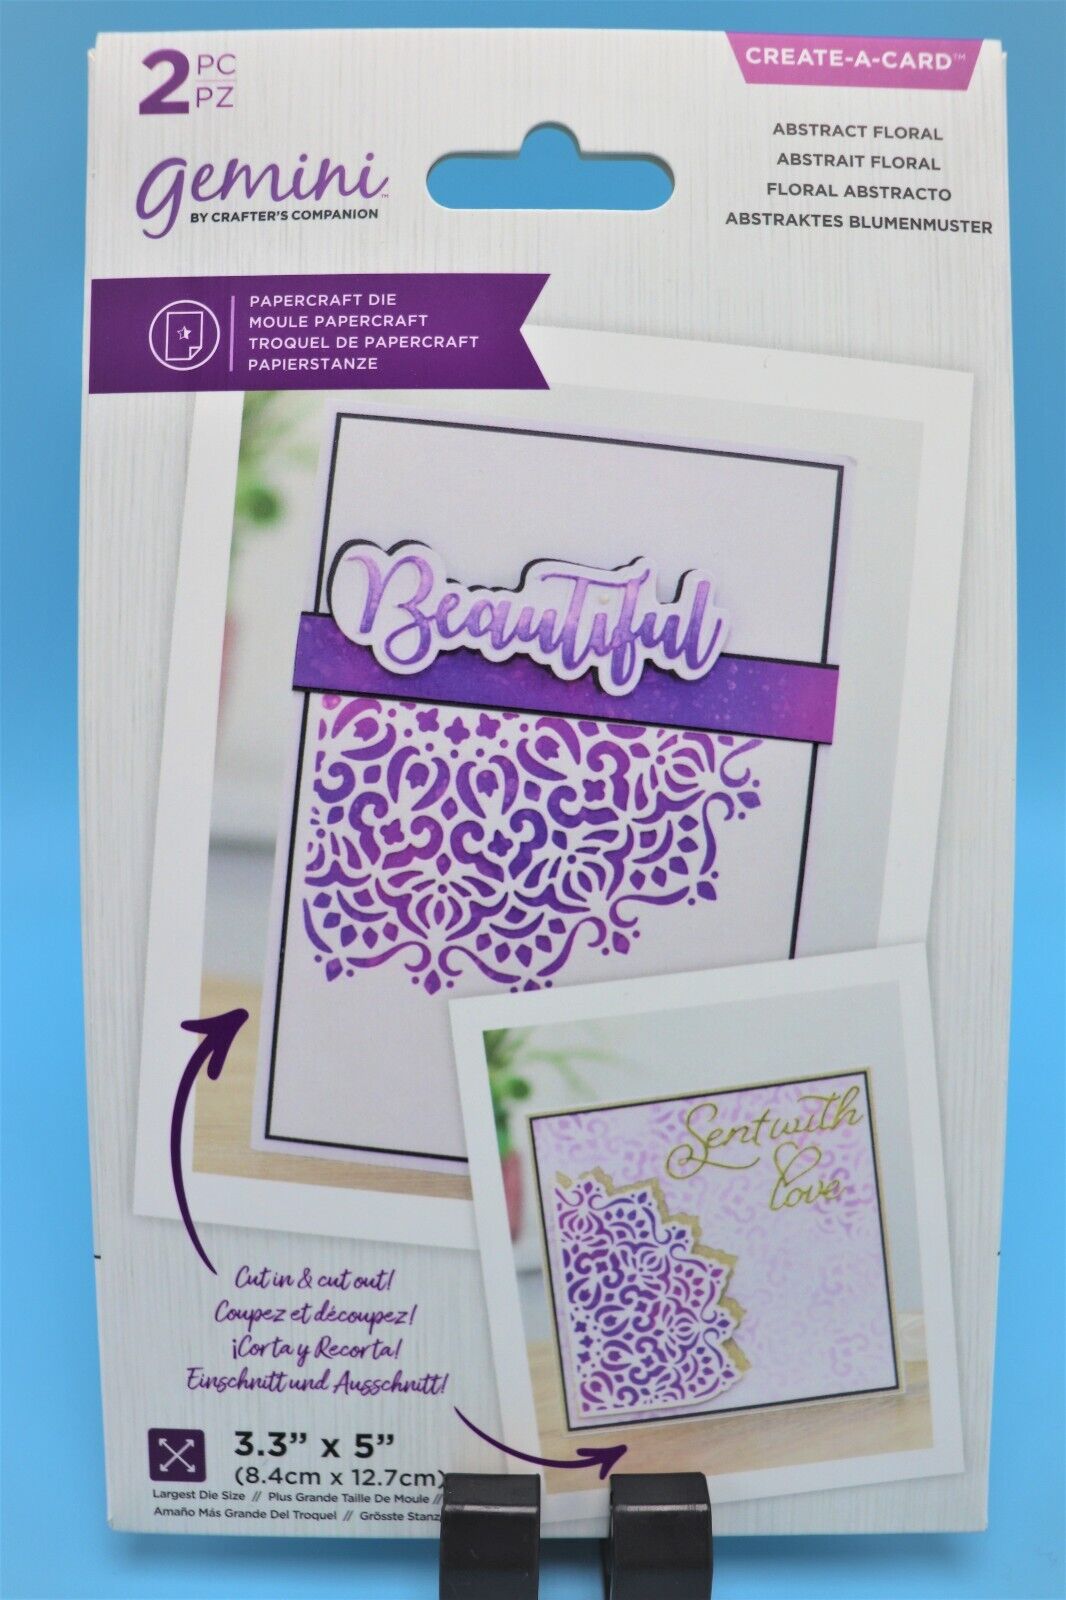 NEW gemini Create a Card Textured Corner Dies by Crafters Companion Gemini Does Not Apply - фотография #9